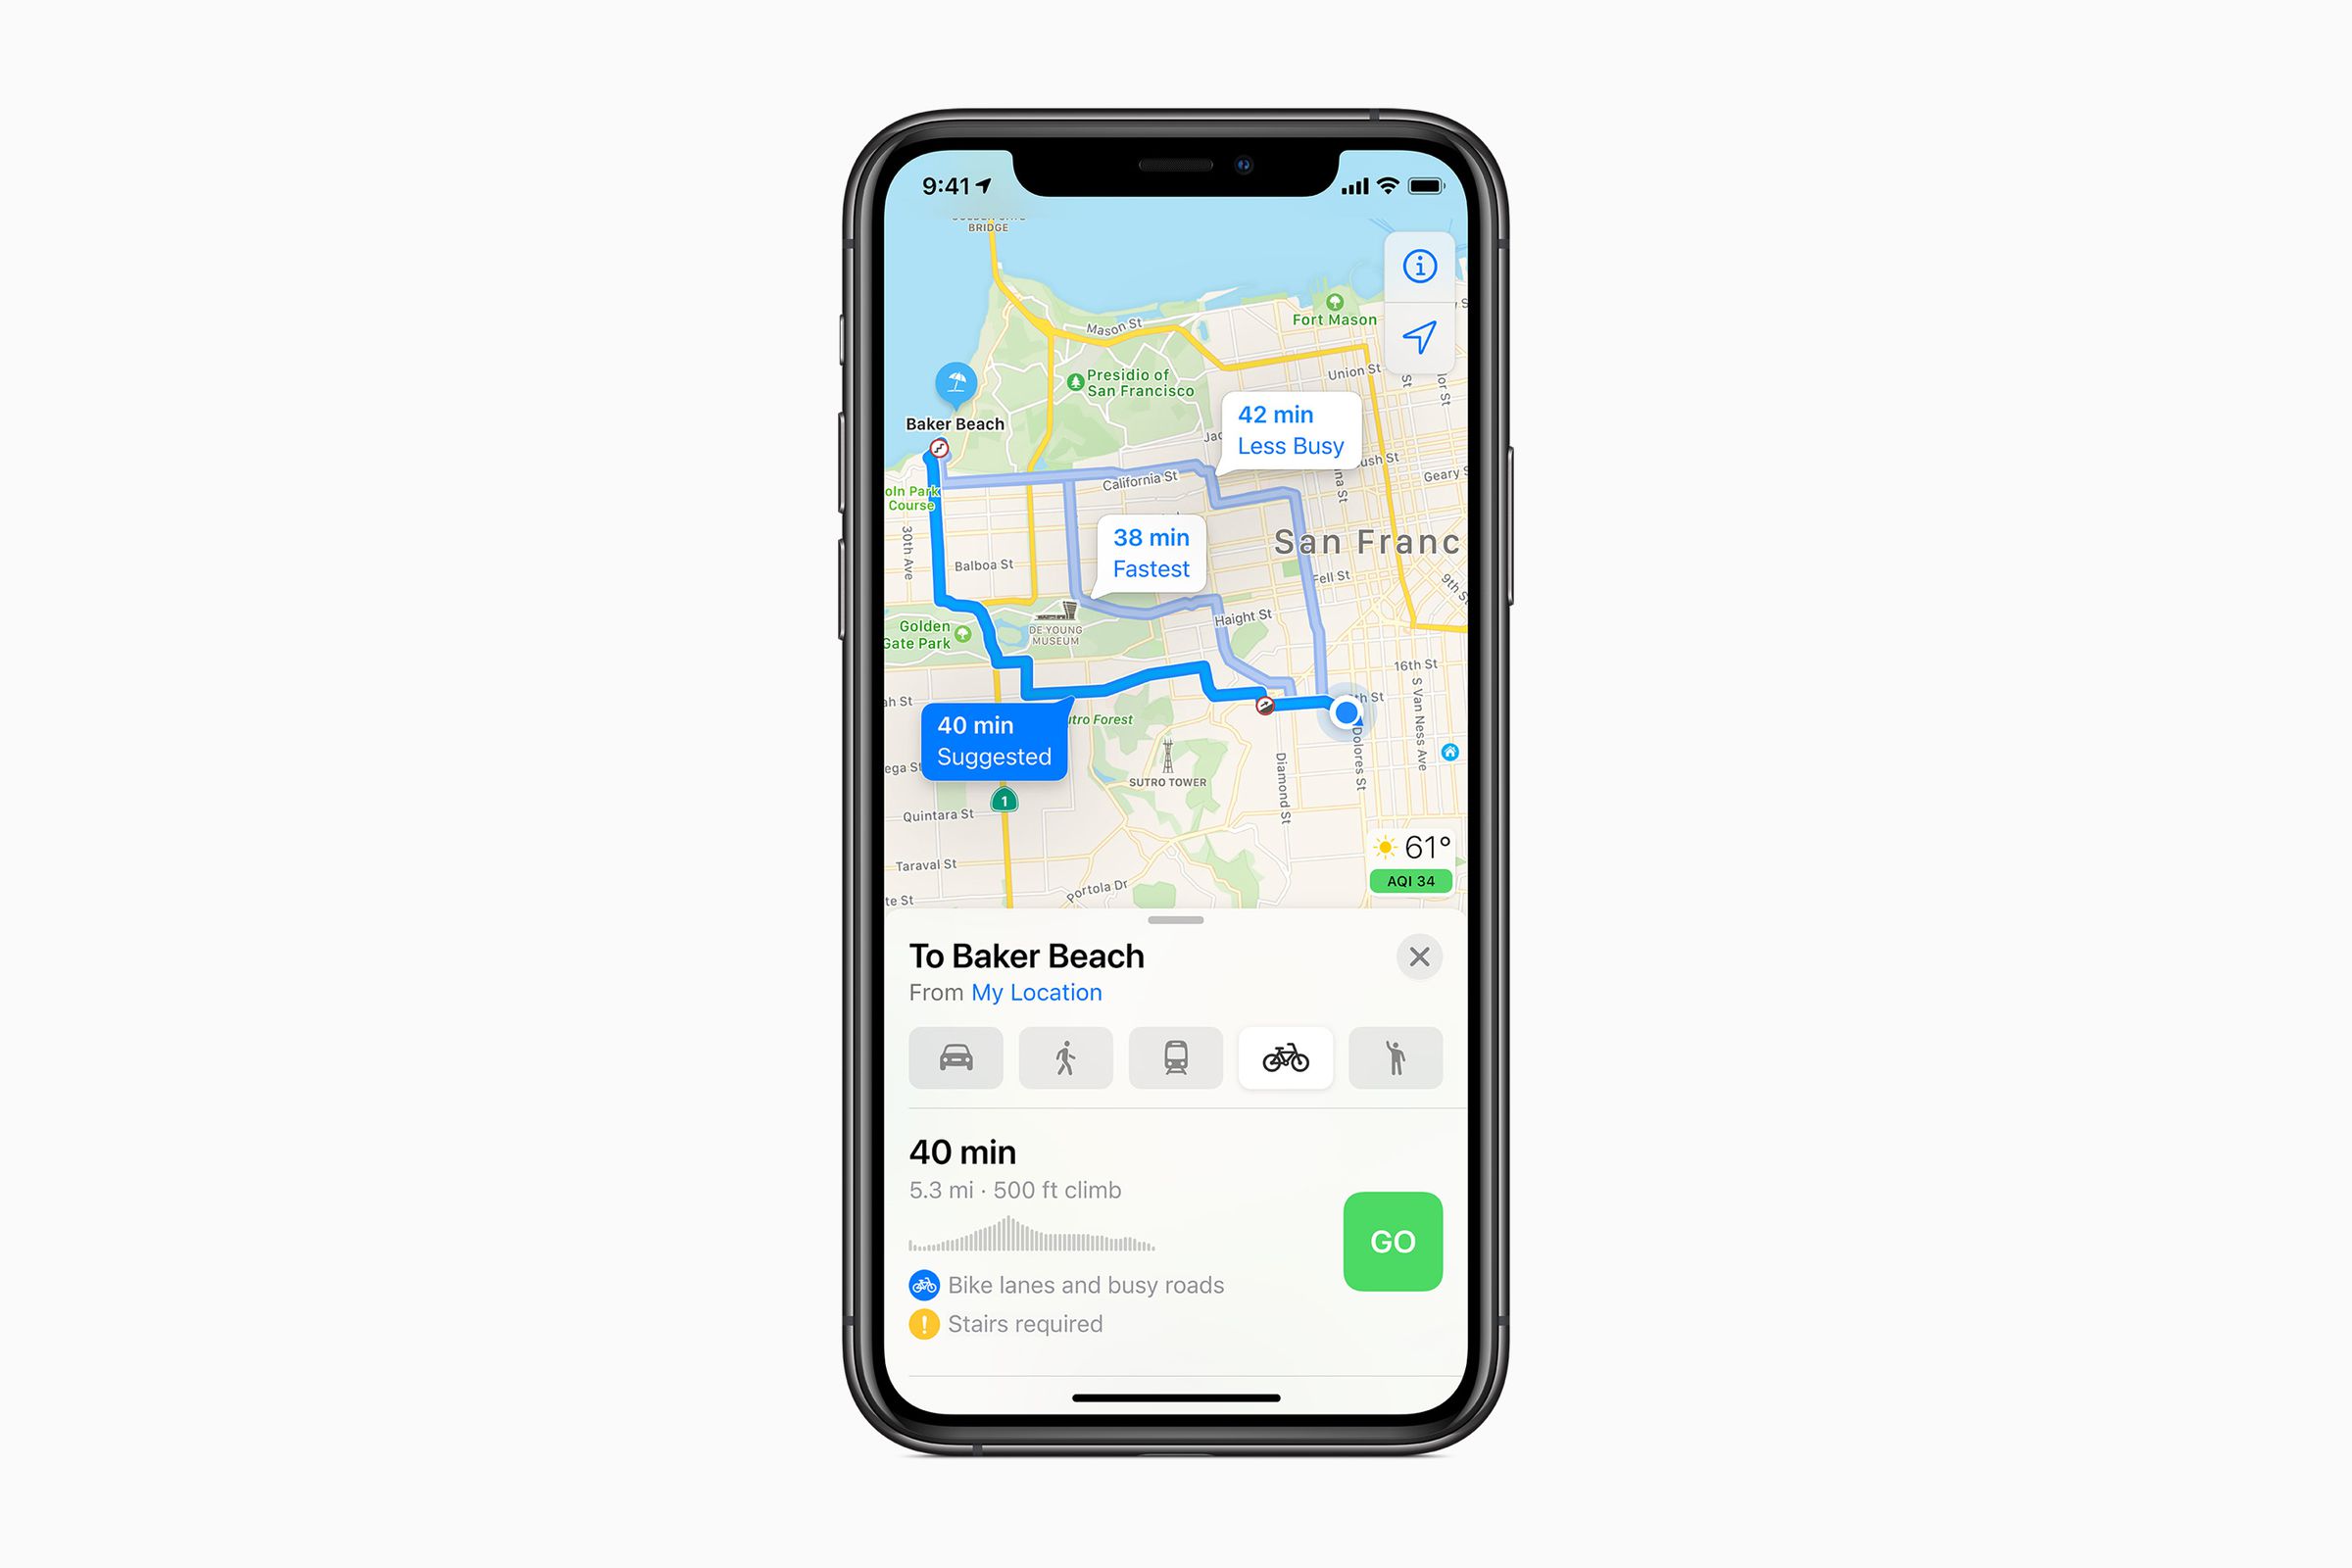 Cycling directions in Apple Maps give you information about how busy a route is.